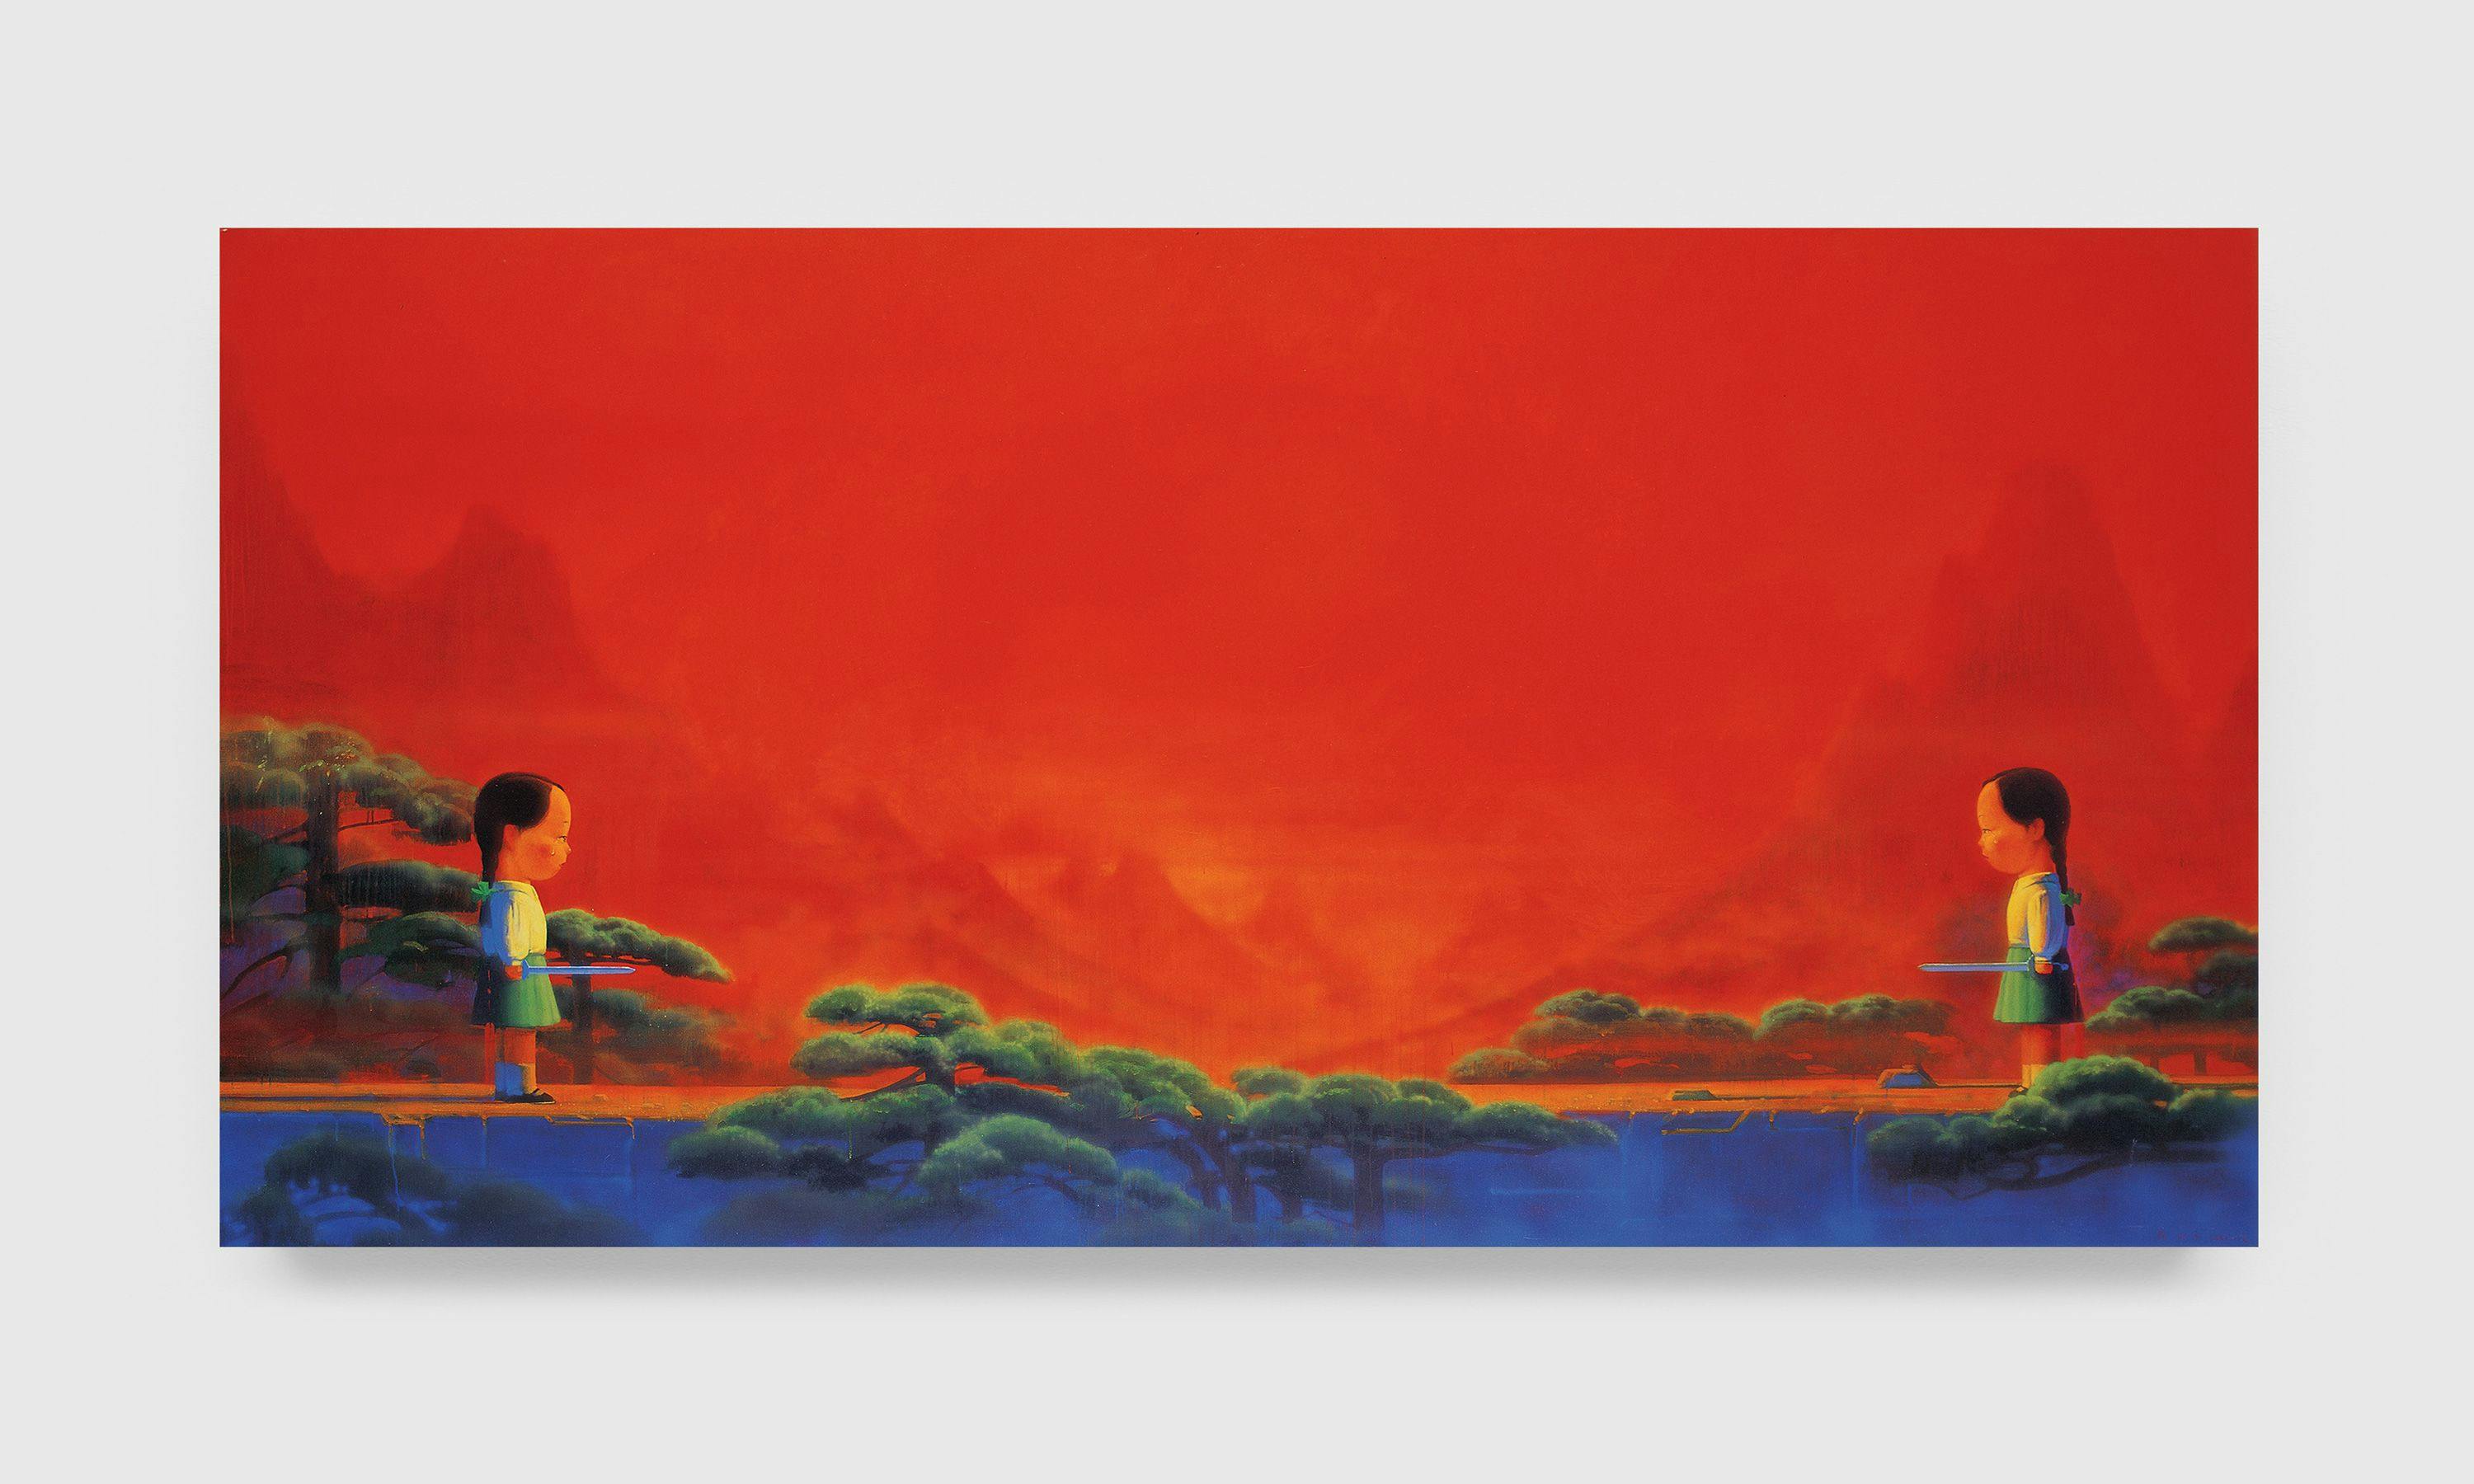 A painting by Liu Ye, titled Sword, 2001 to 2002.